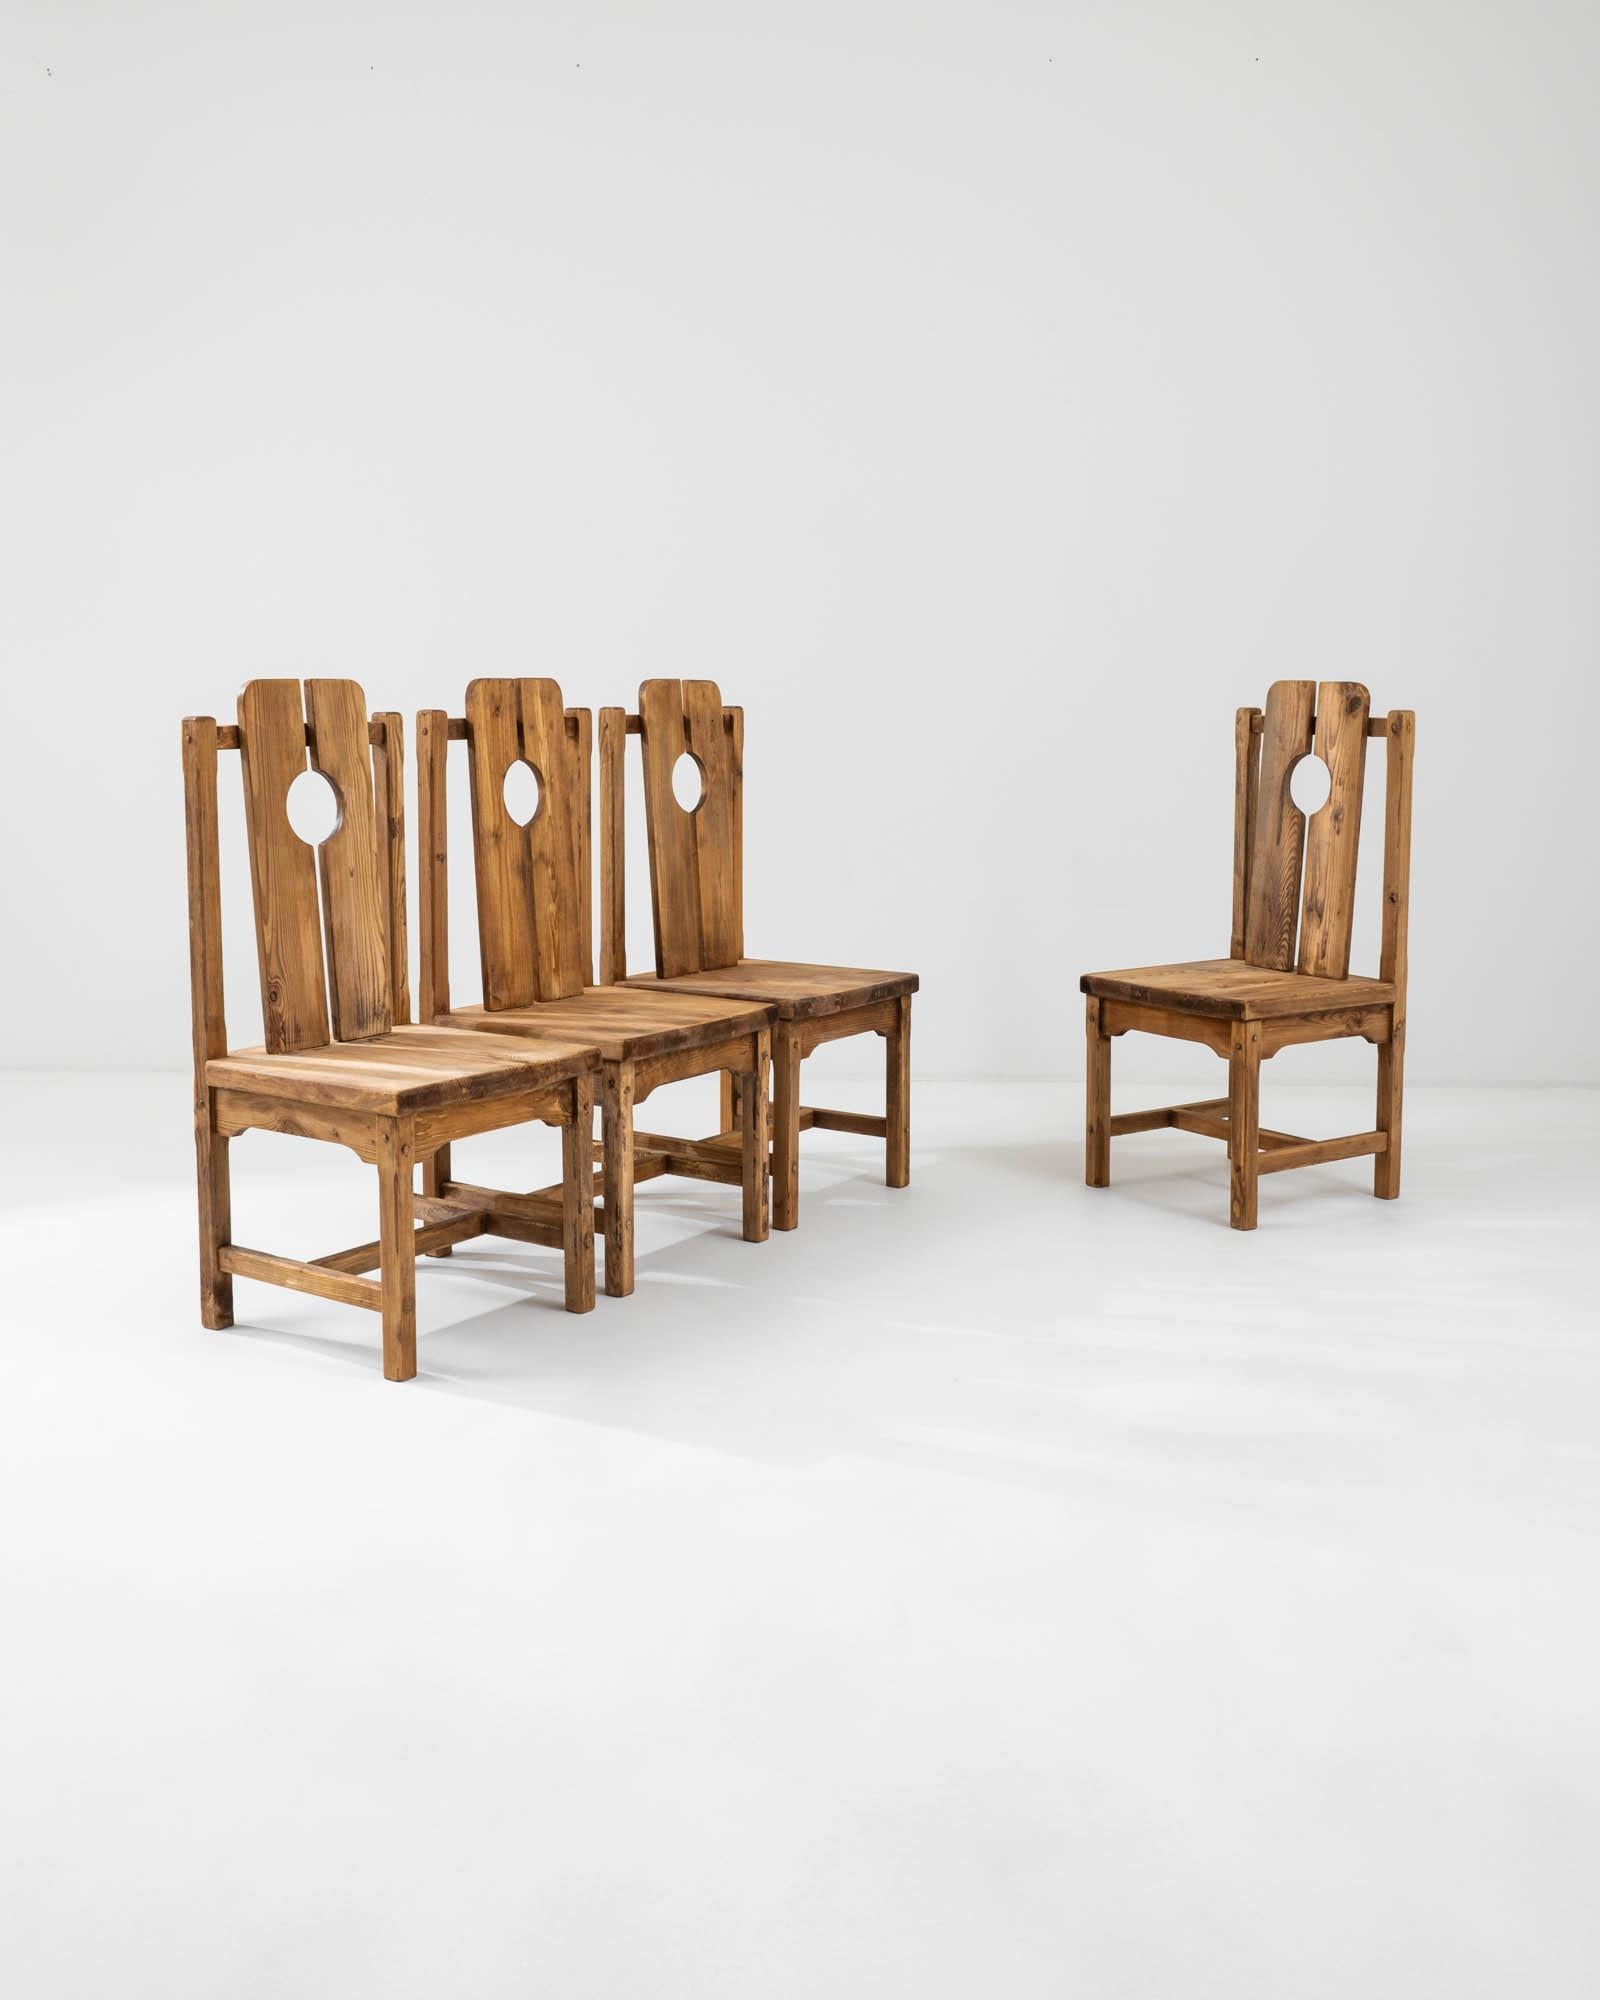 A set of wooden dining chairs created in early 20th century France. This set of unique dining chairs exudes a woodsy, brutalist charm, with warm and bright wood and minimal design details. Two rounded planks rest side by side to form a neat circle